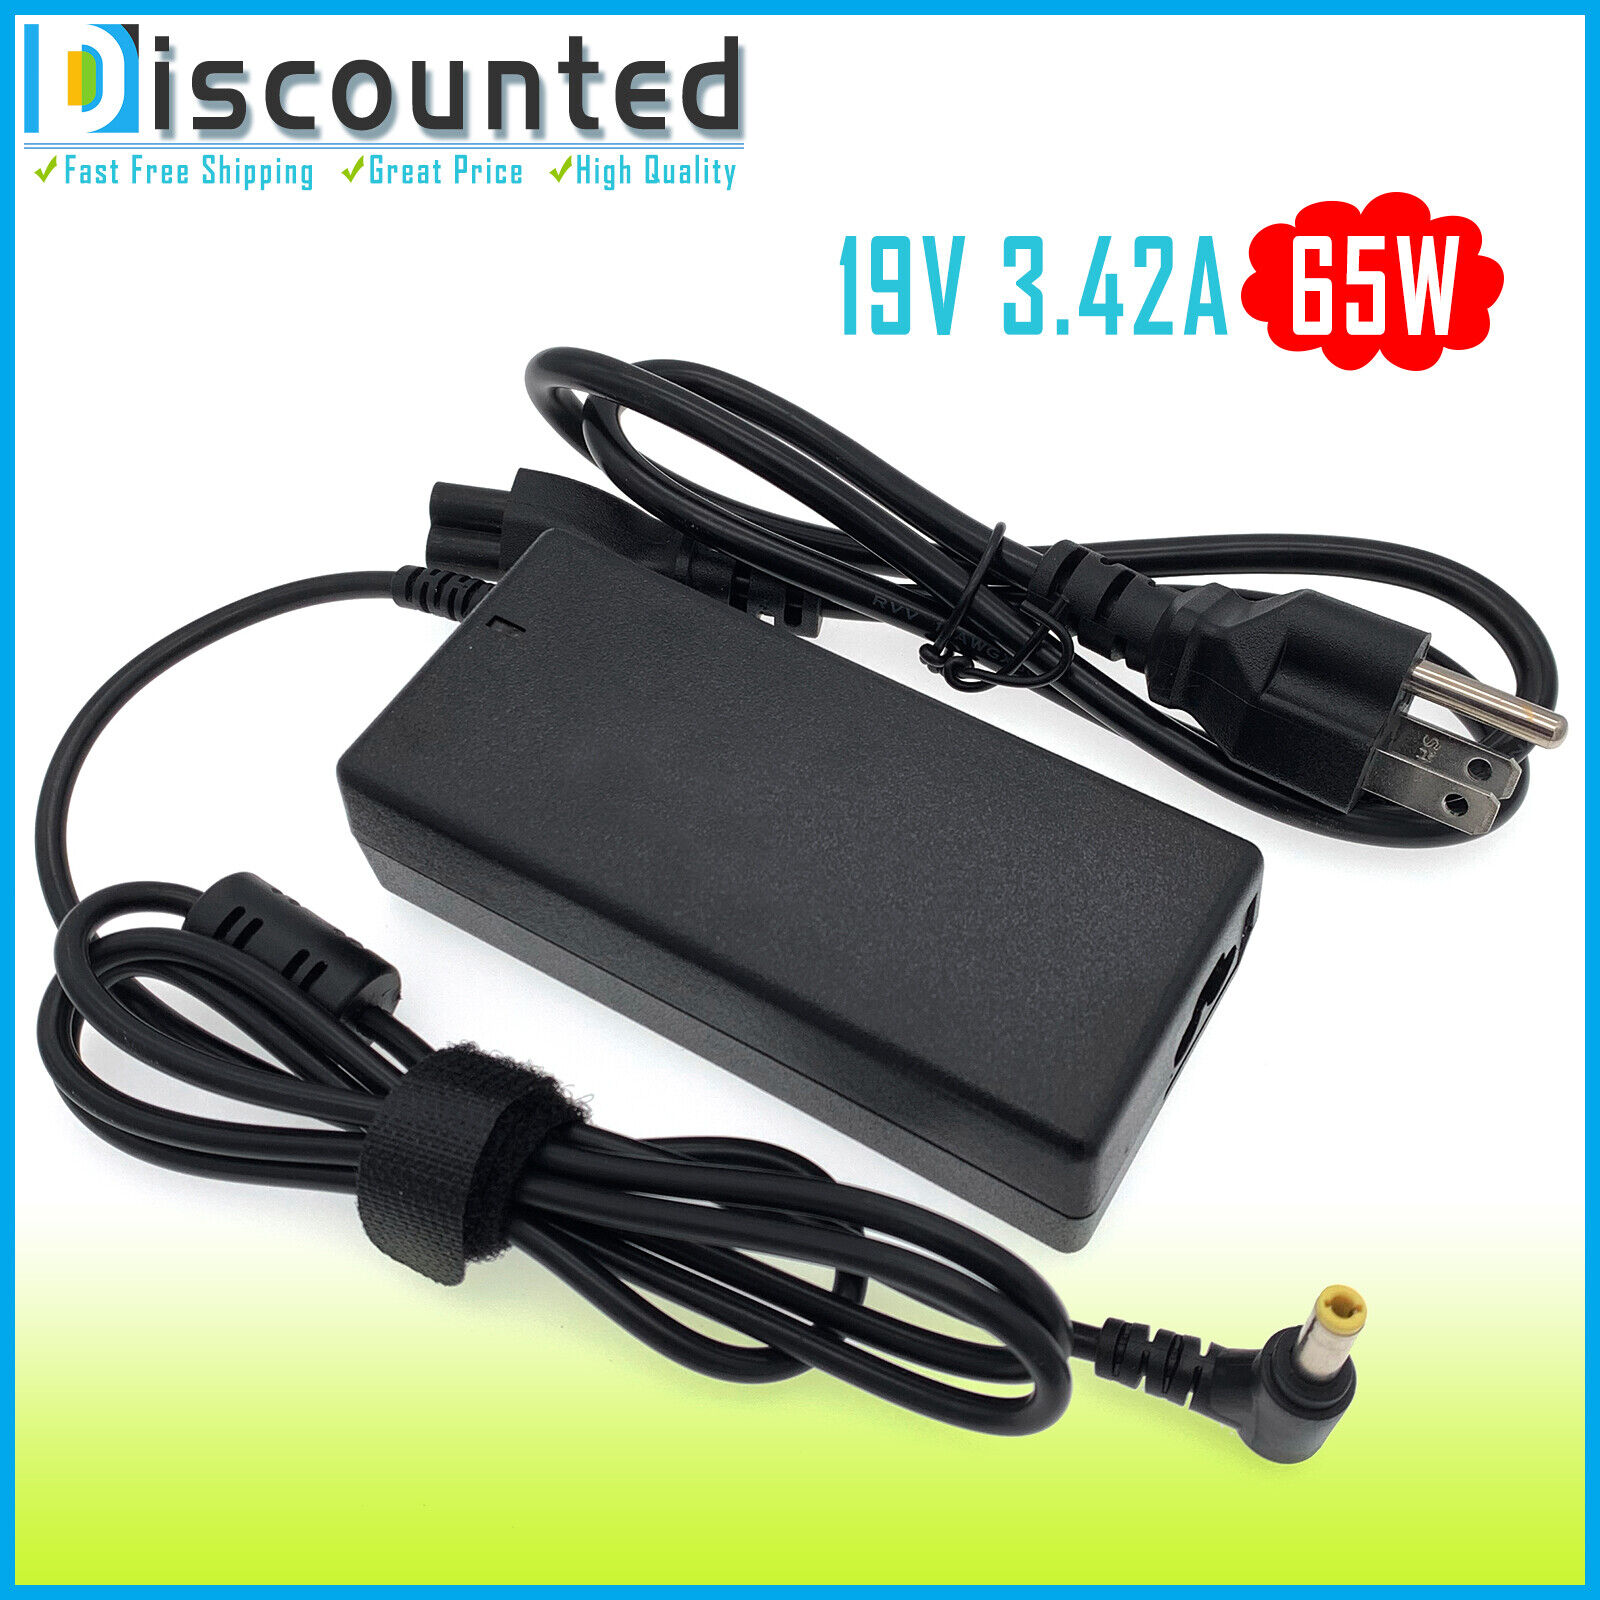 AC ADAPTER CHARGER POWER FOR ASUS S46C S46CA S46CM S56C S56CA S56CM ULTRABOOK